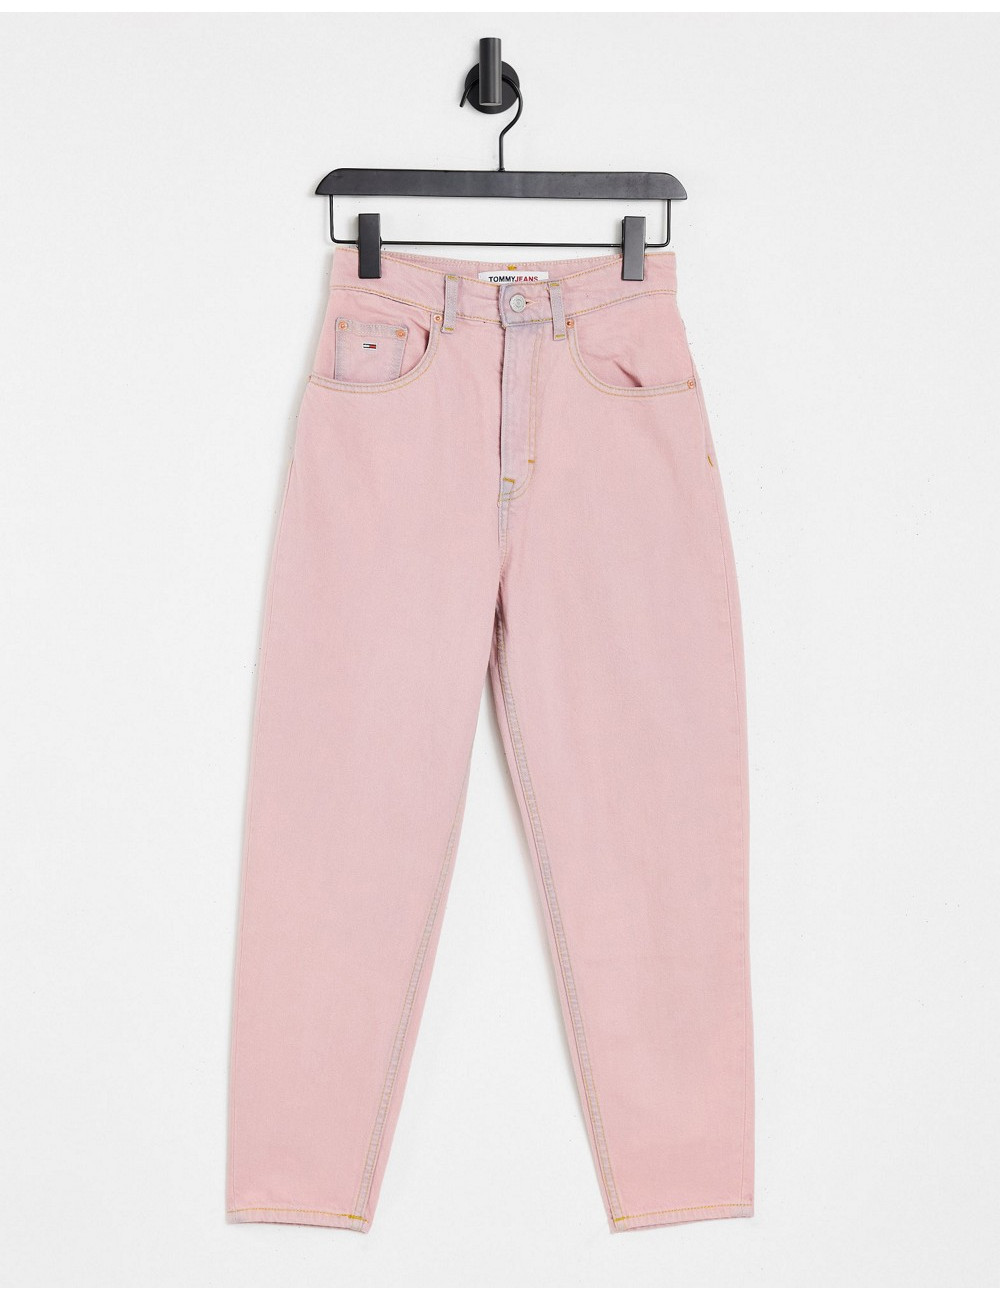 Tommy Jeans mom jean in pink